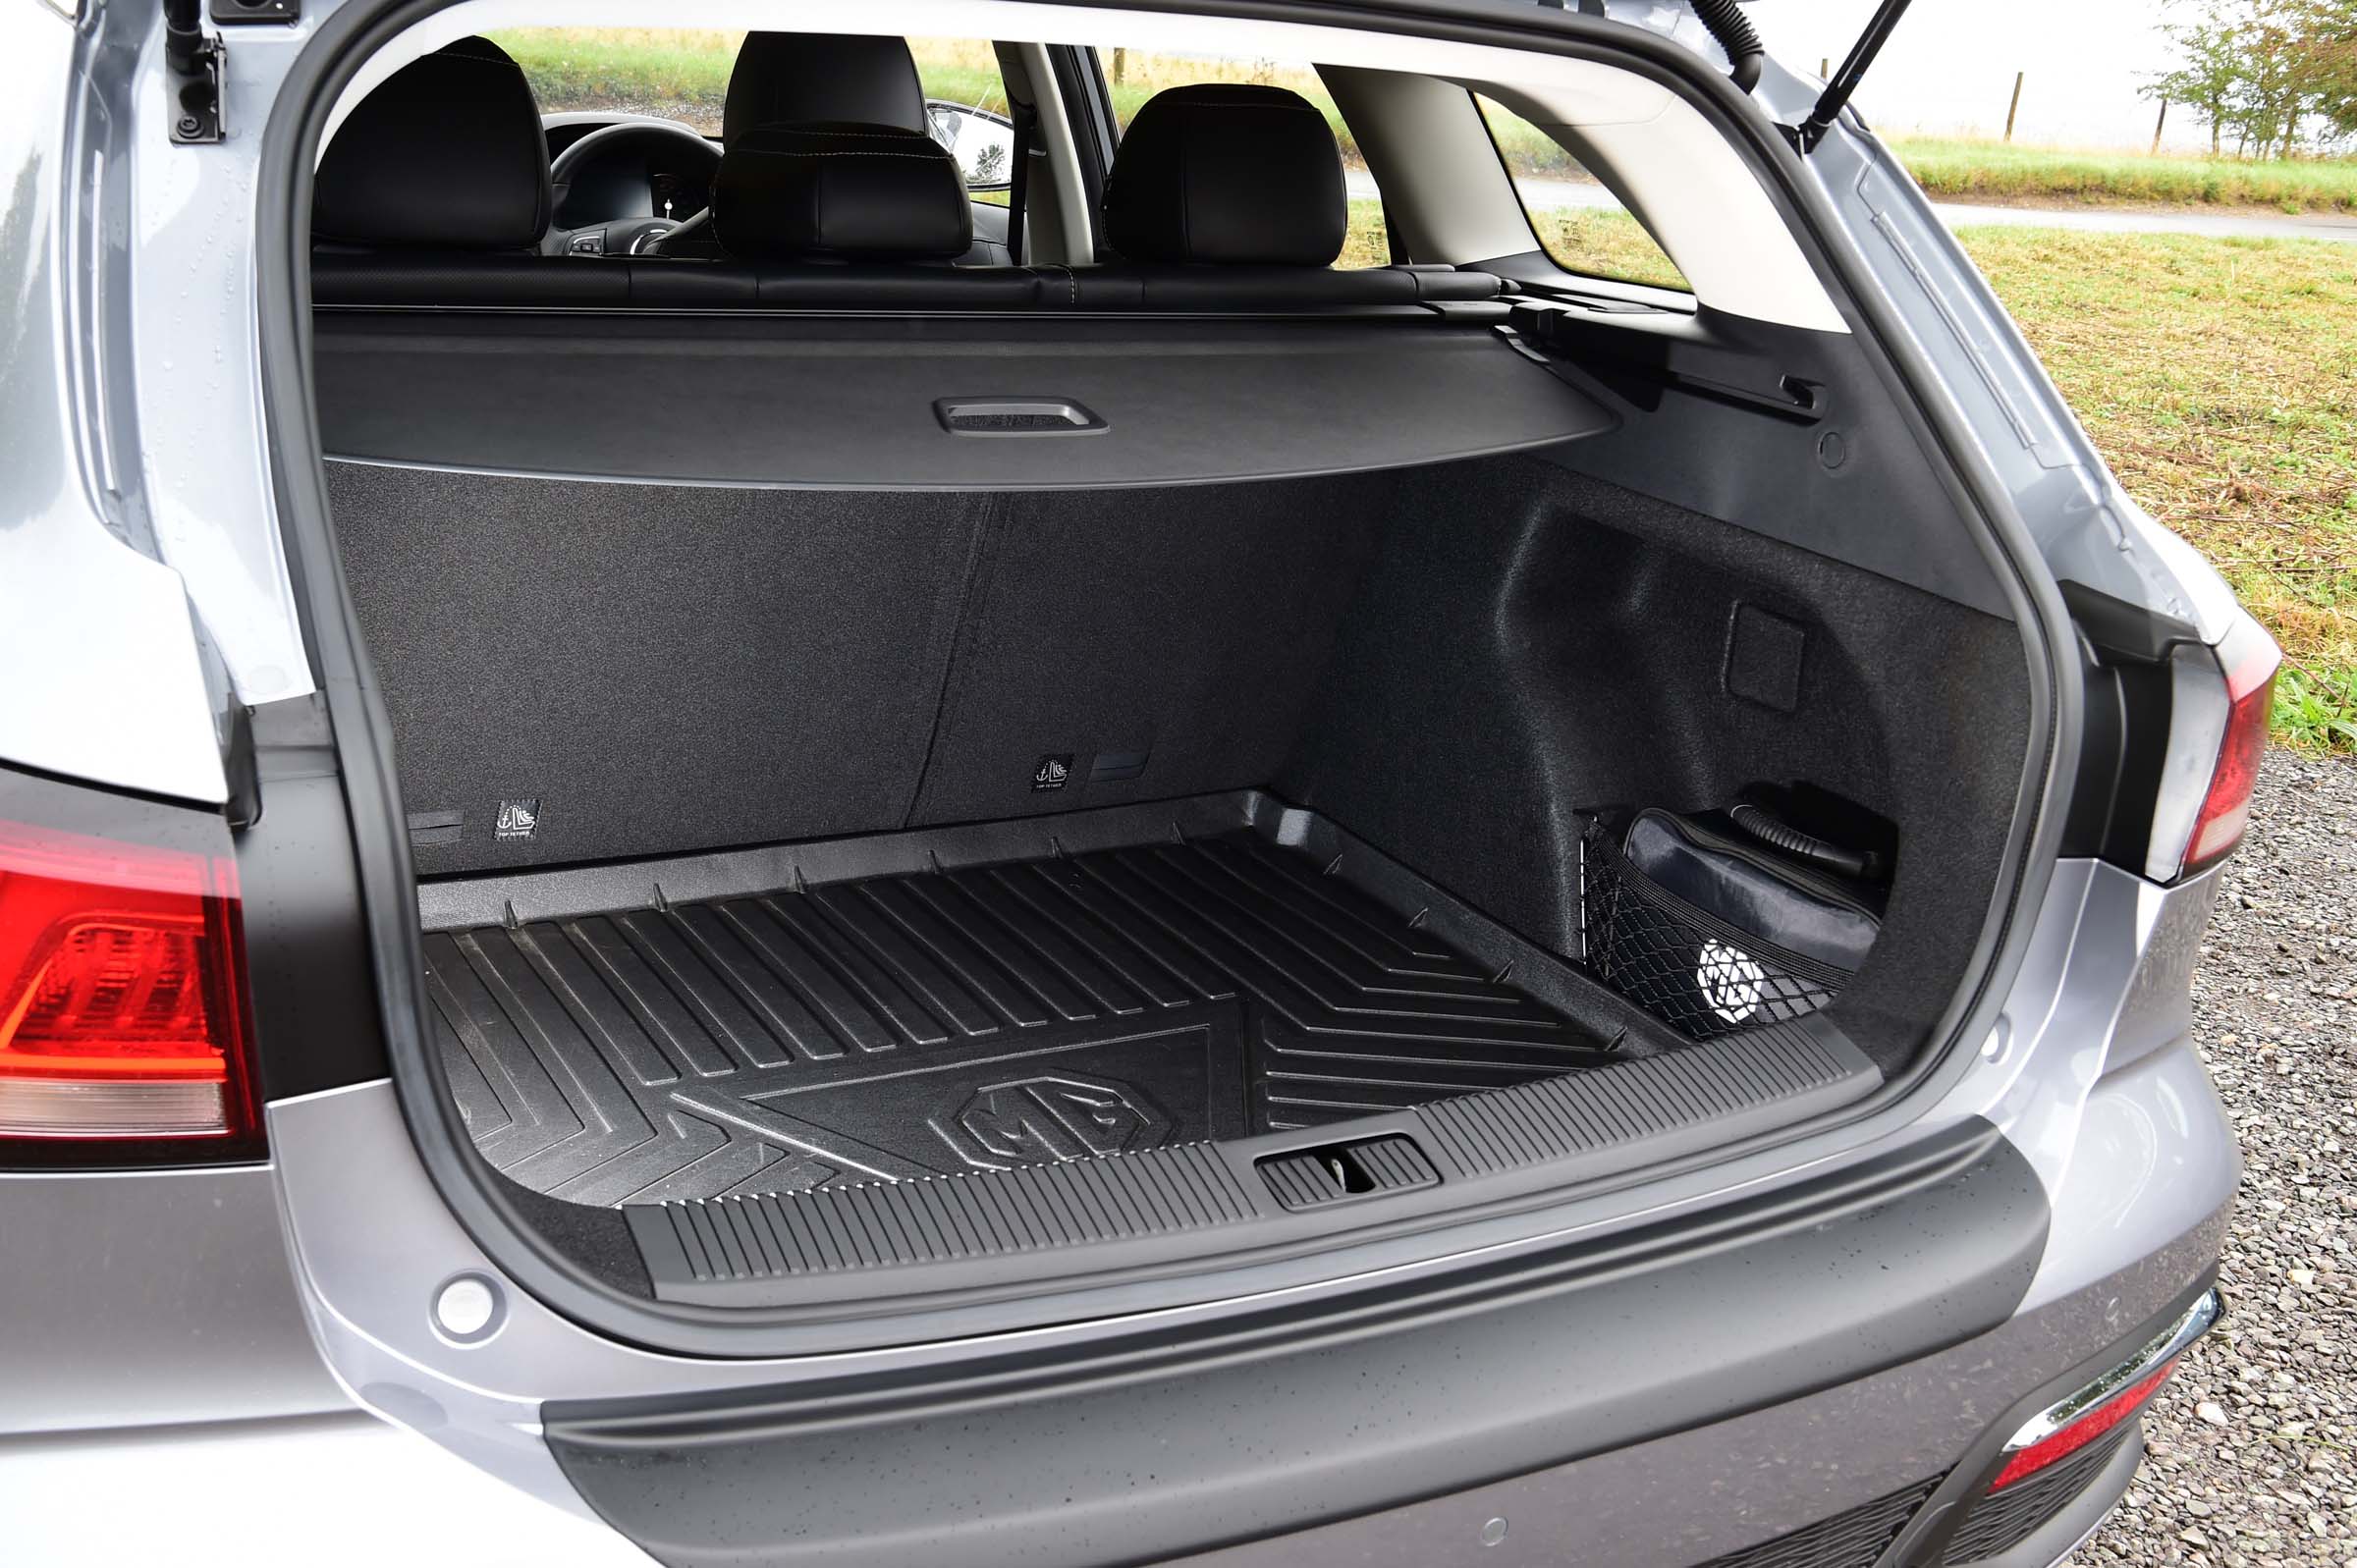 MG 5 SW practicality & boot space | DrivingElectric